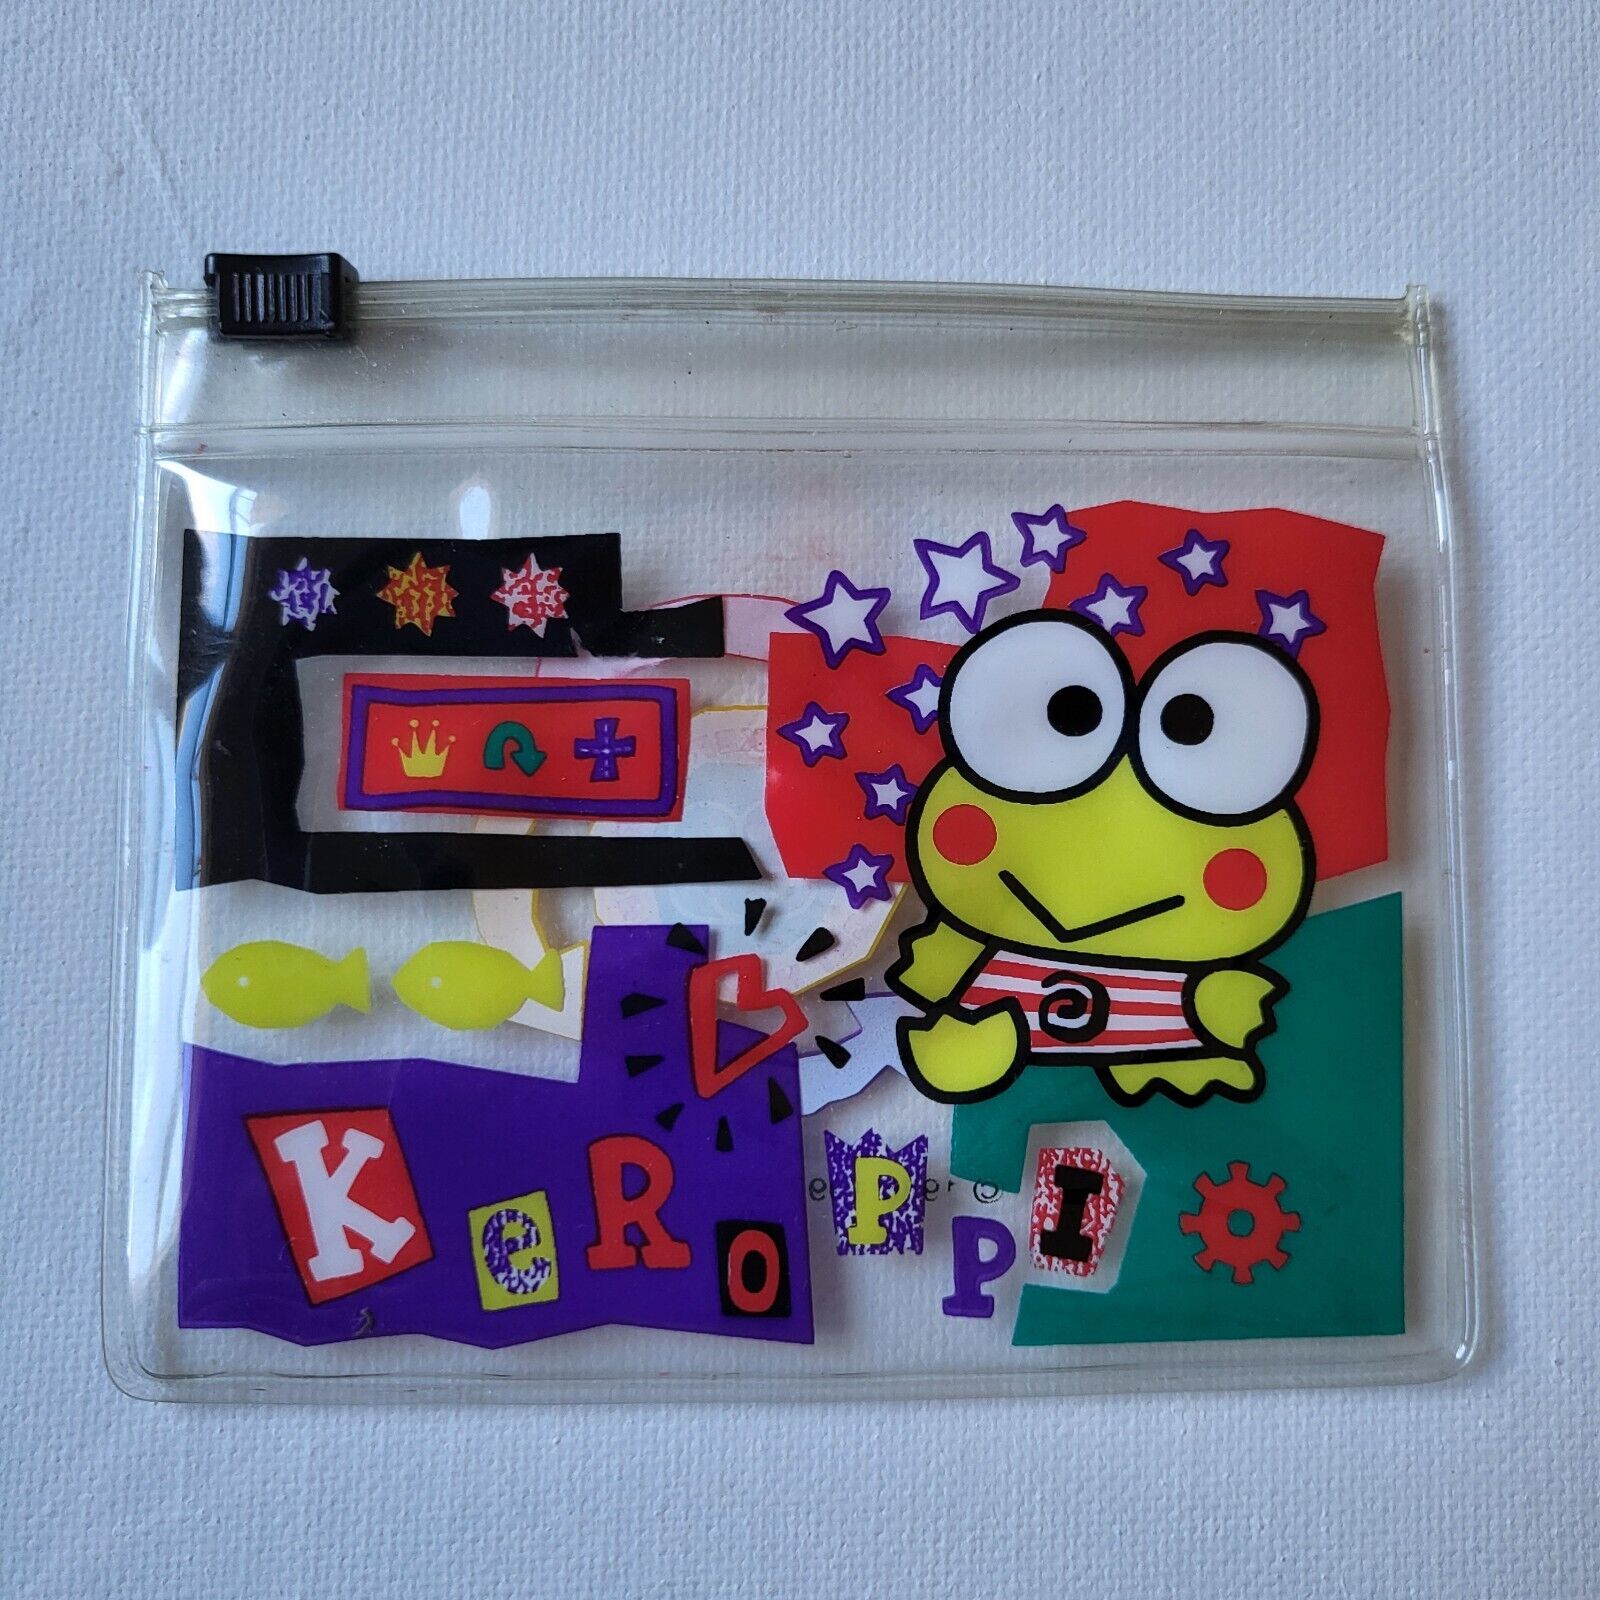 Sanrio Keroppi Plastic Wallet Pouch Coin Purse Bag Resycle Taiwan 1990s VTG 